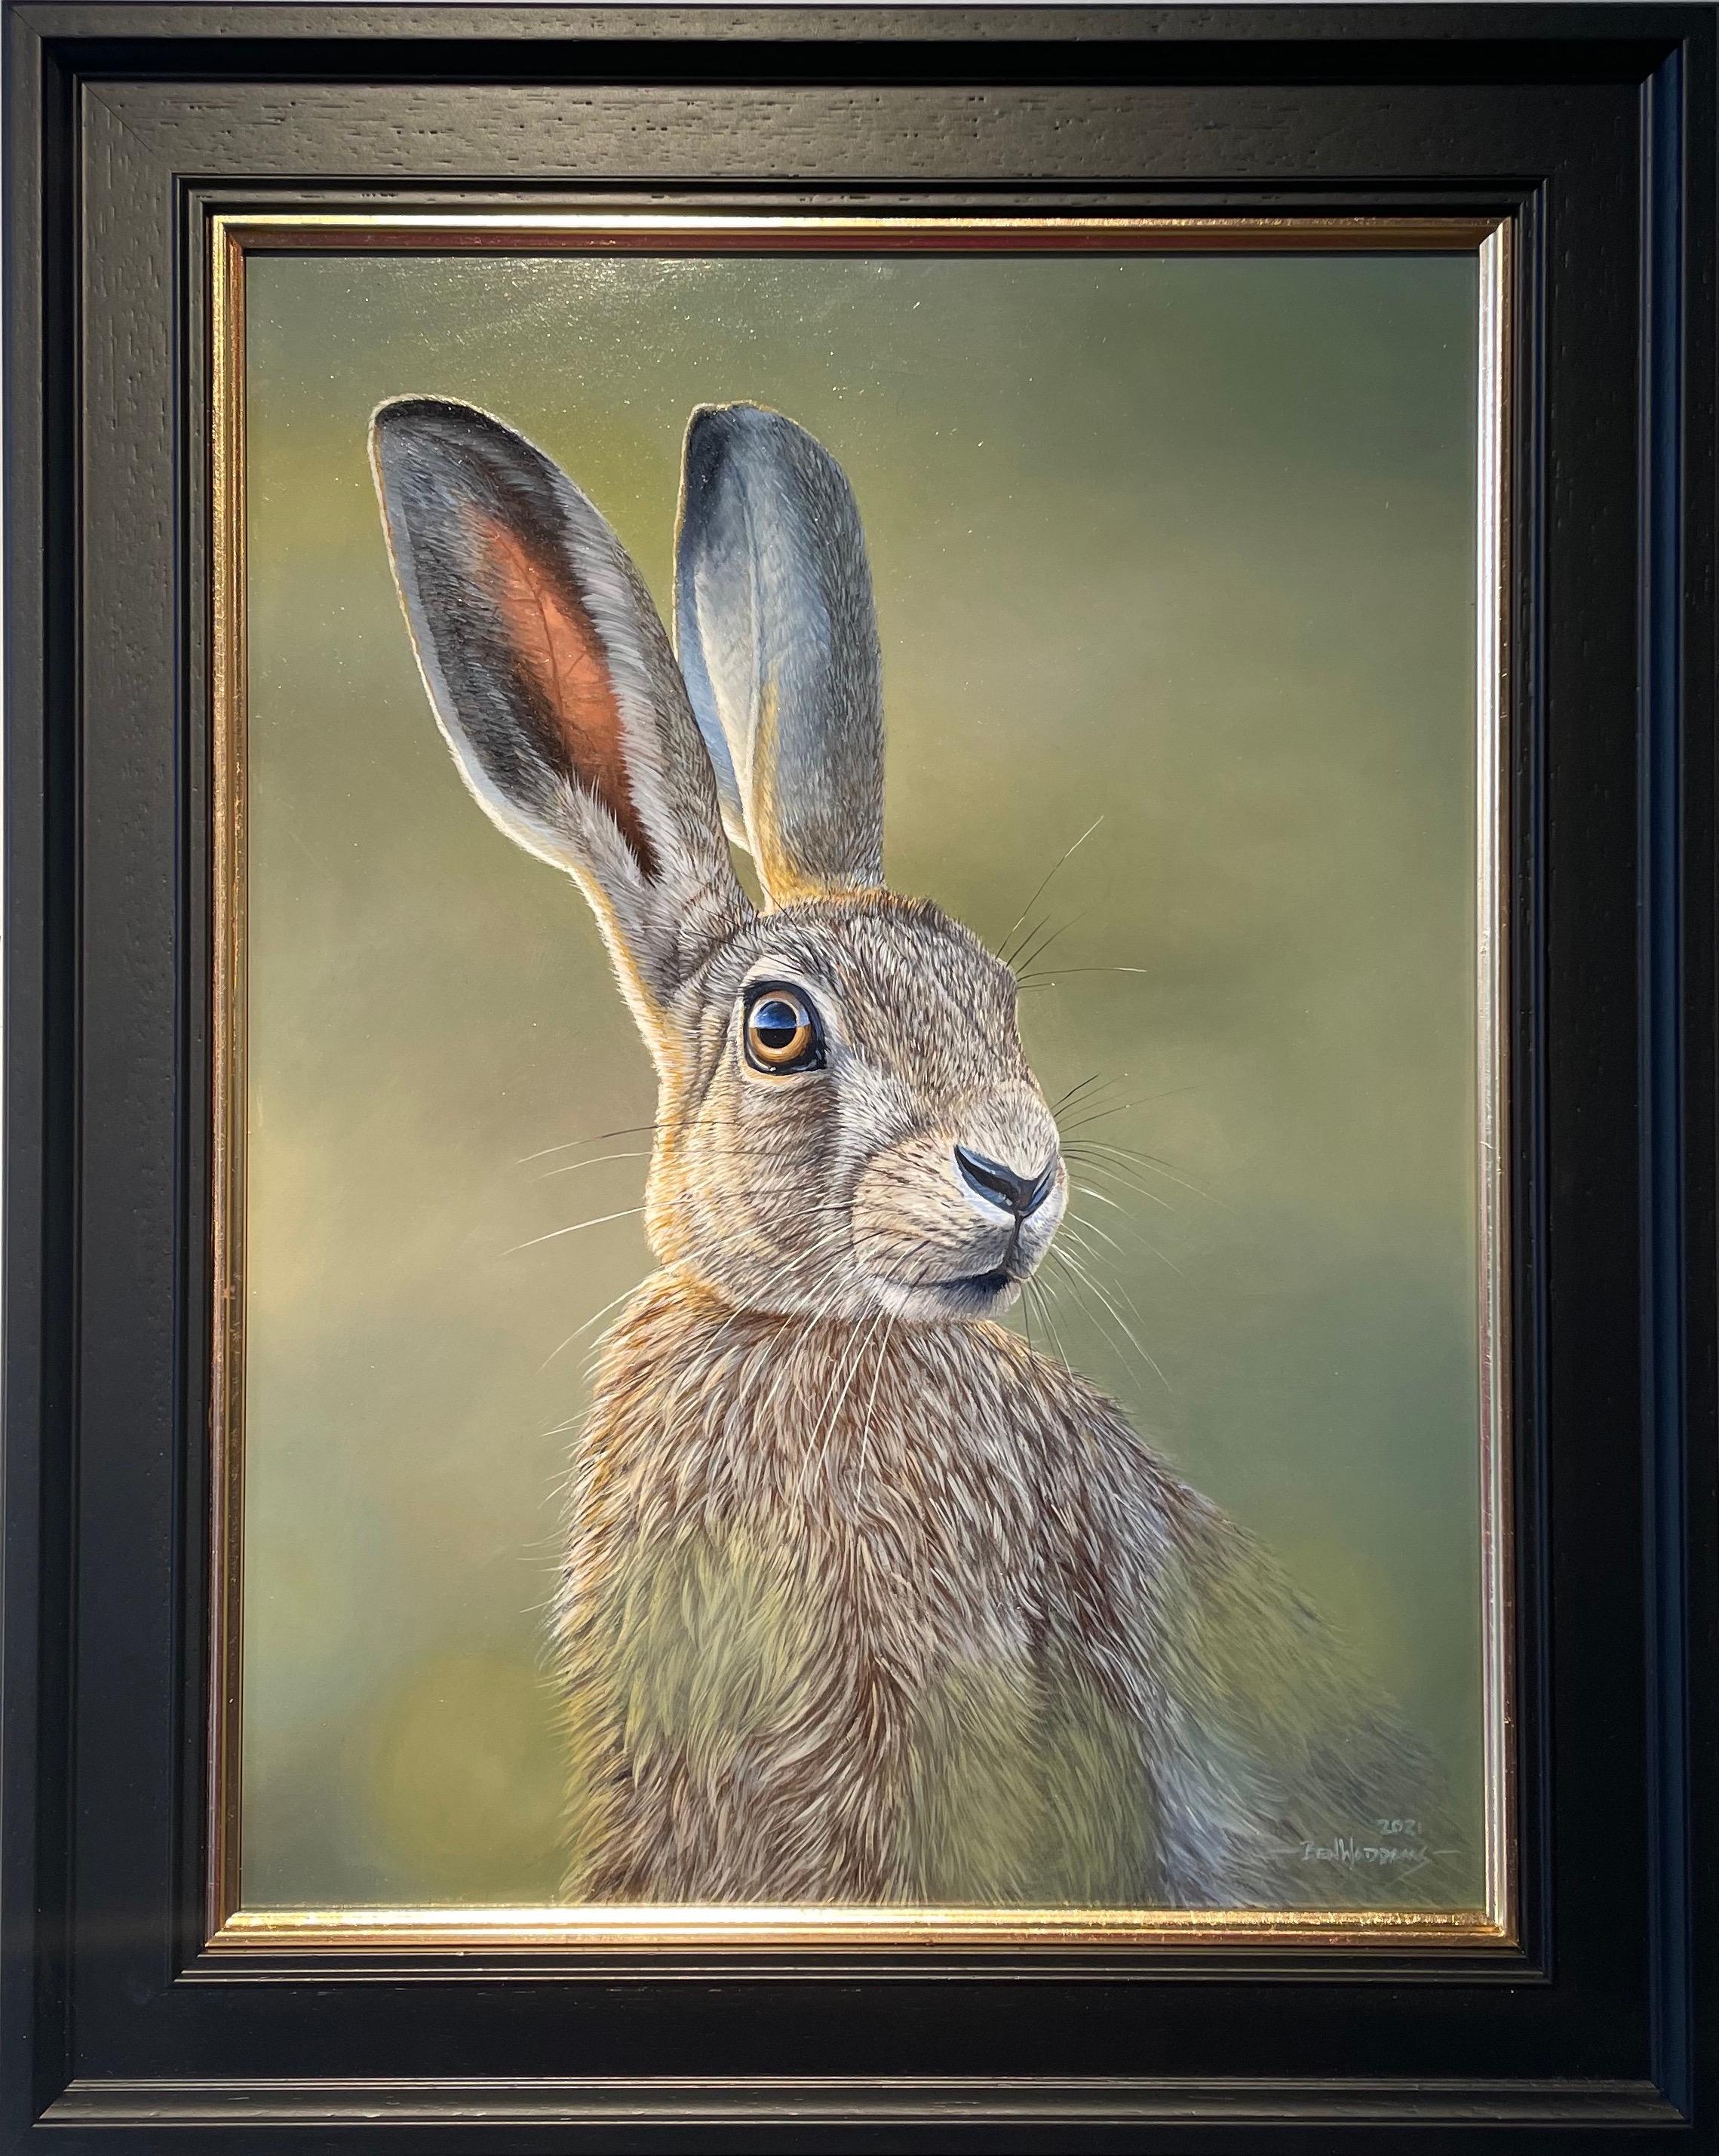 Ben Waddams Animal Painting - 'Alert Hare' Contemporary photorealist painting of a hare in wildlife, green